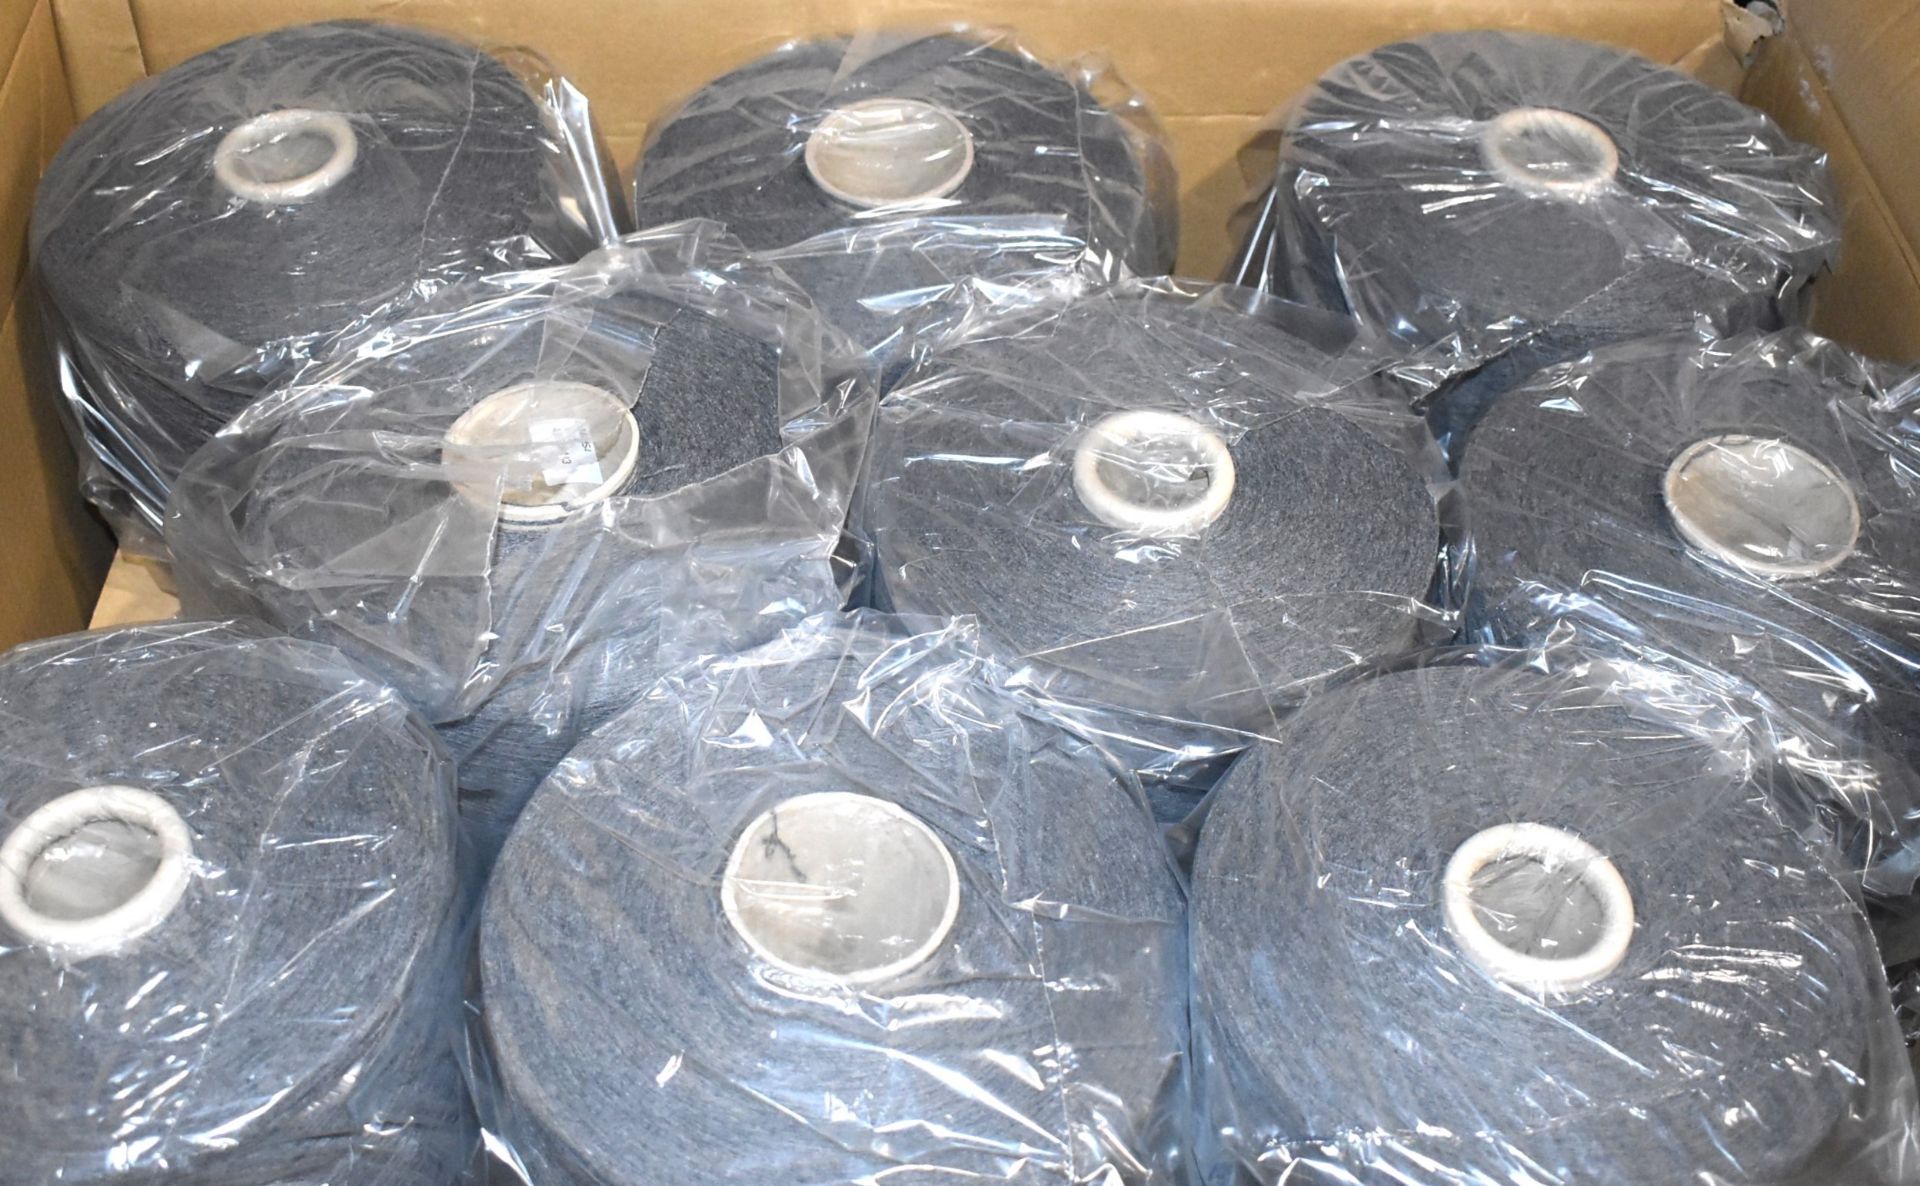 18 x Cones of 1/13 MicroCotton Knitting Yarn - Mid Grey - Approx Weight: 2,500g - New Stock ABL Yarn - Image 2 of 16